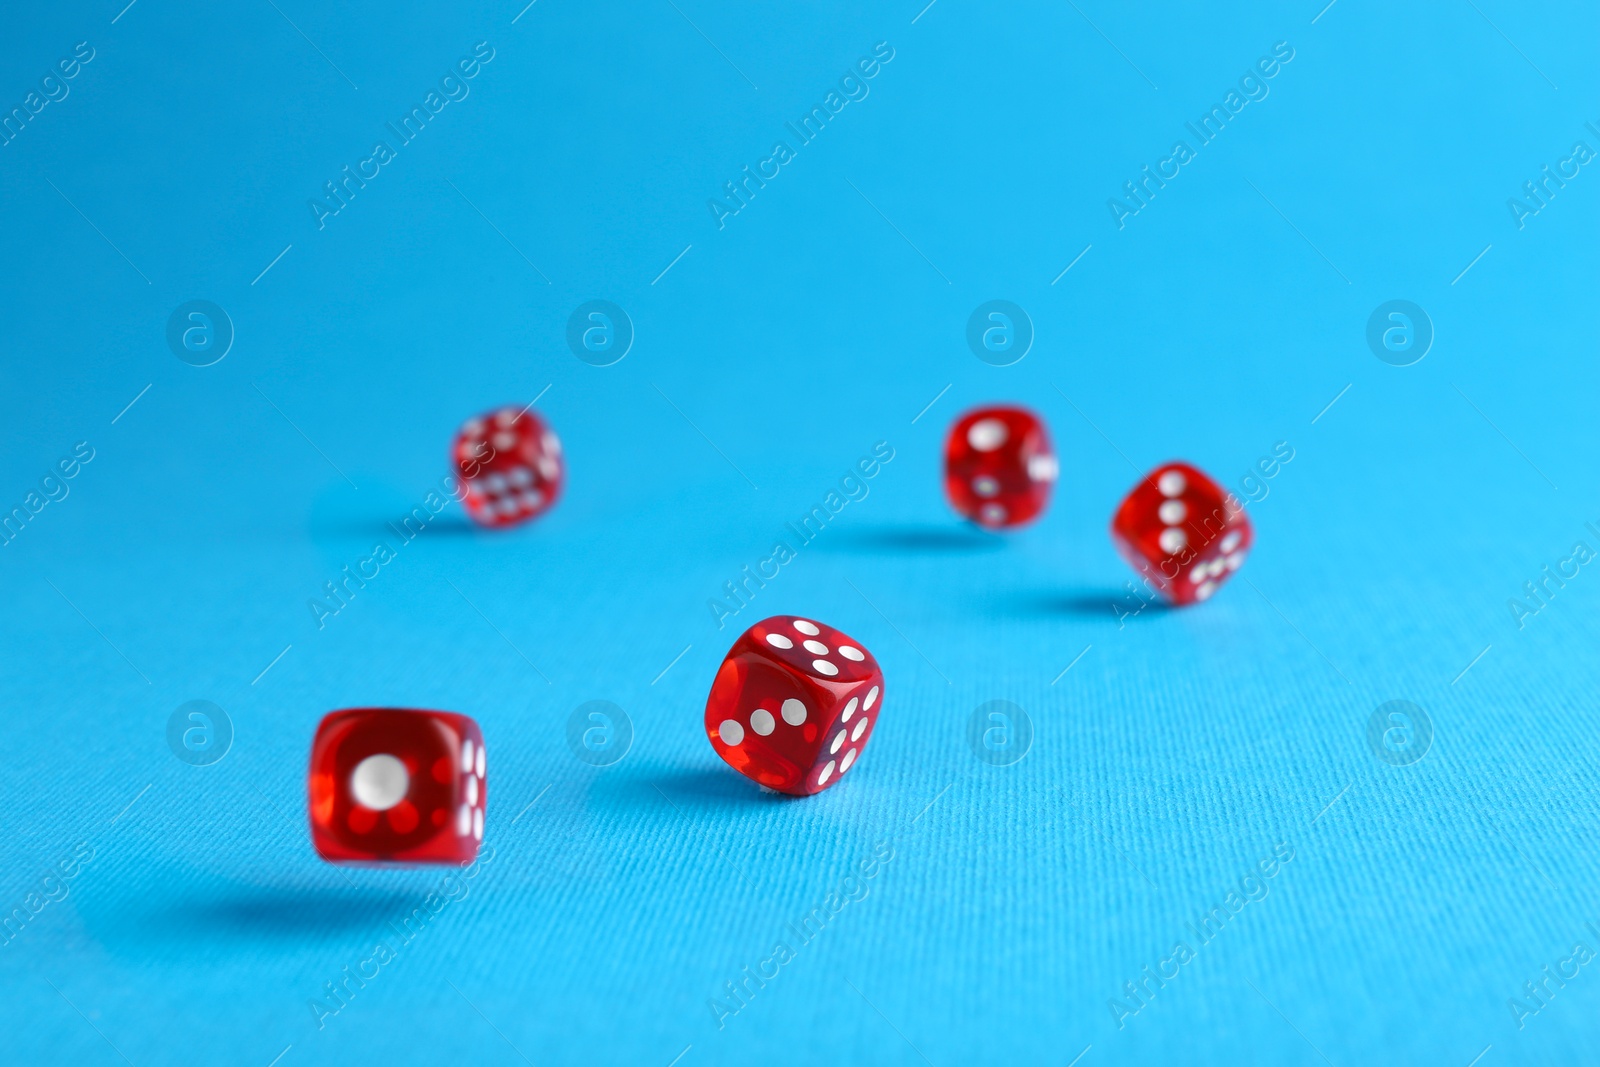 Photo of Many red game dices falling on light blue background